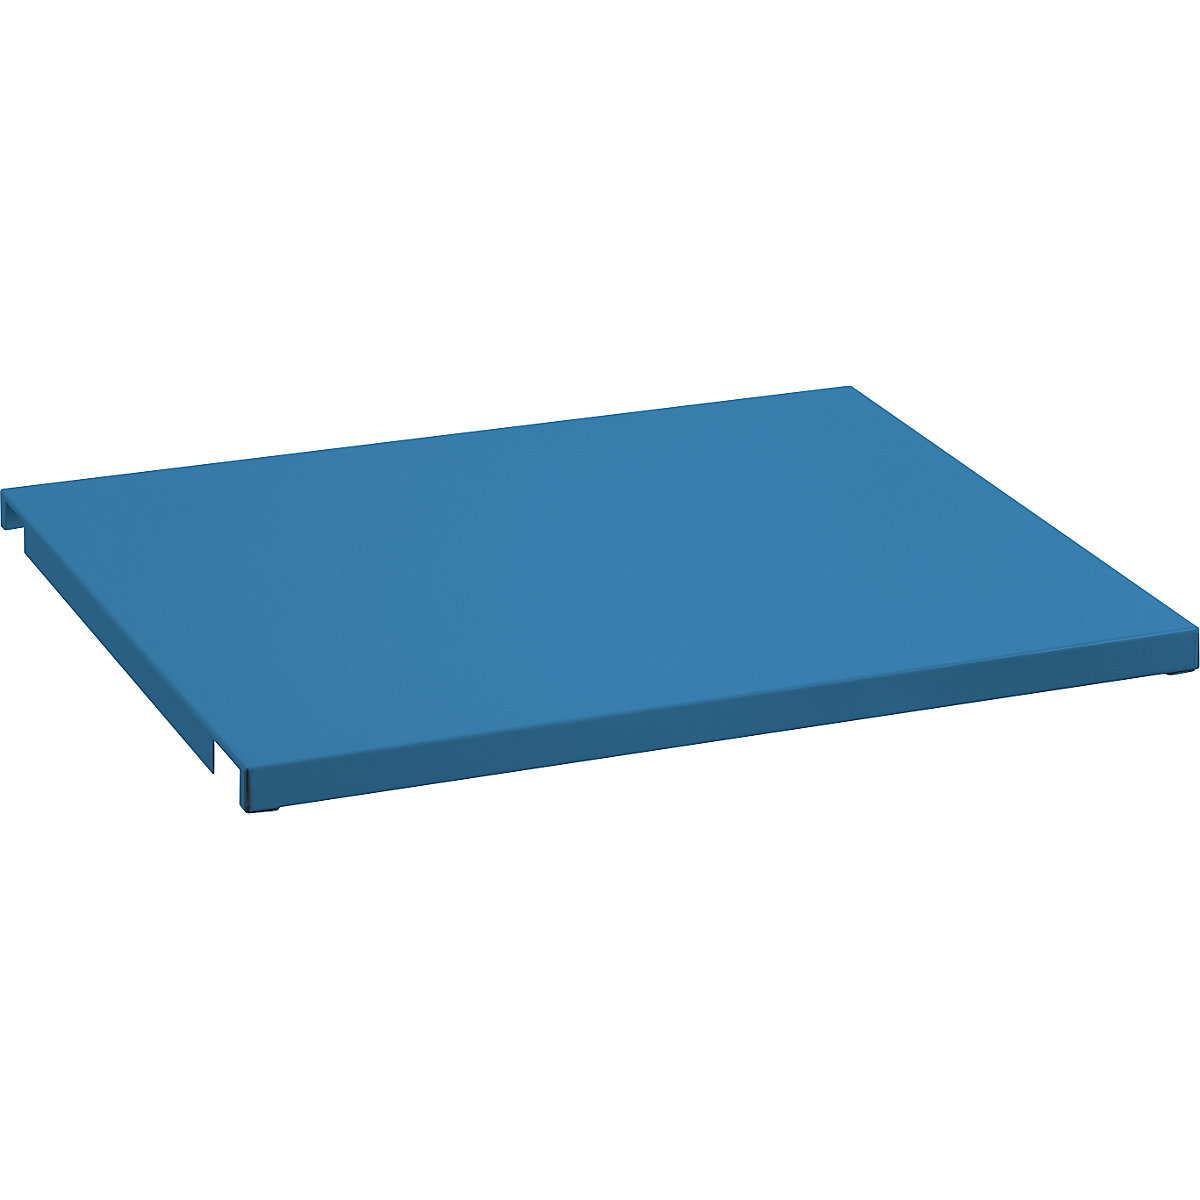 Sheet metal cover for fixed frame – LISTA, for WxD 1290 x 1260 mm, light blue